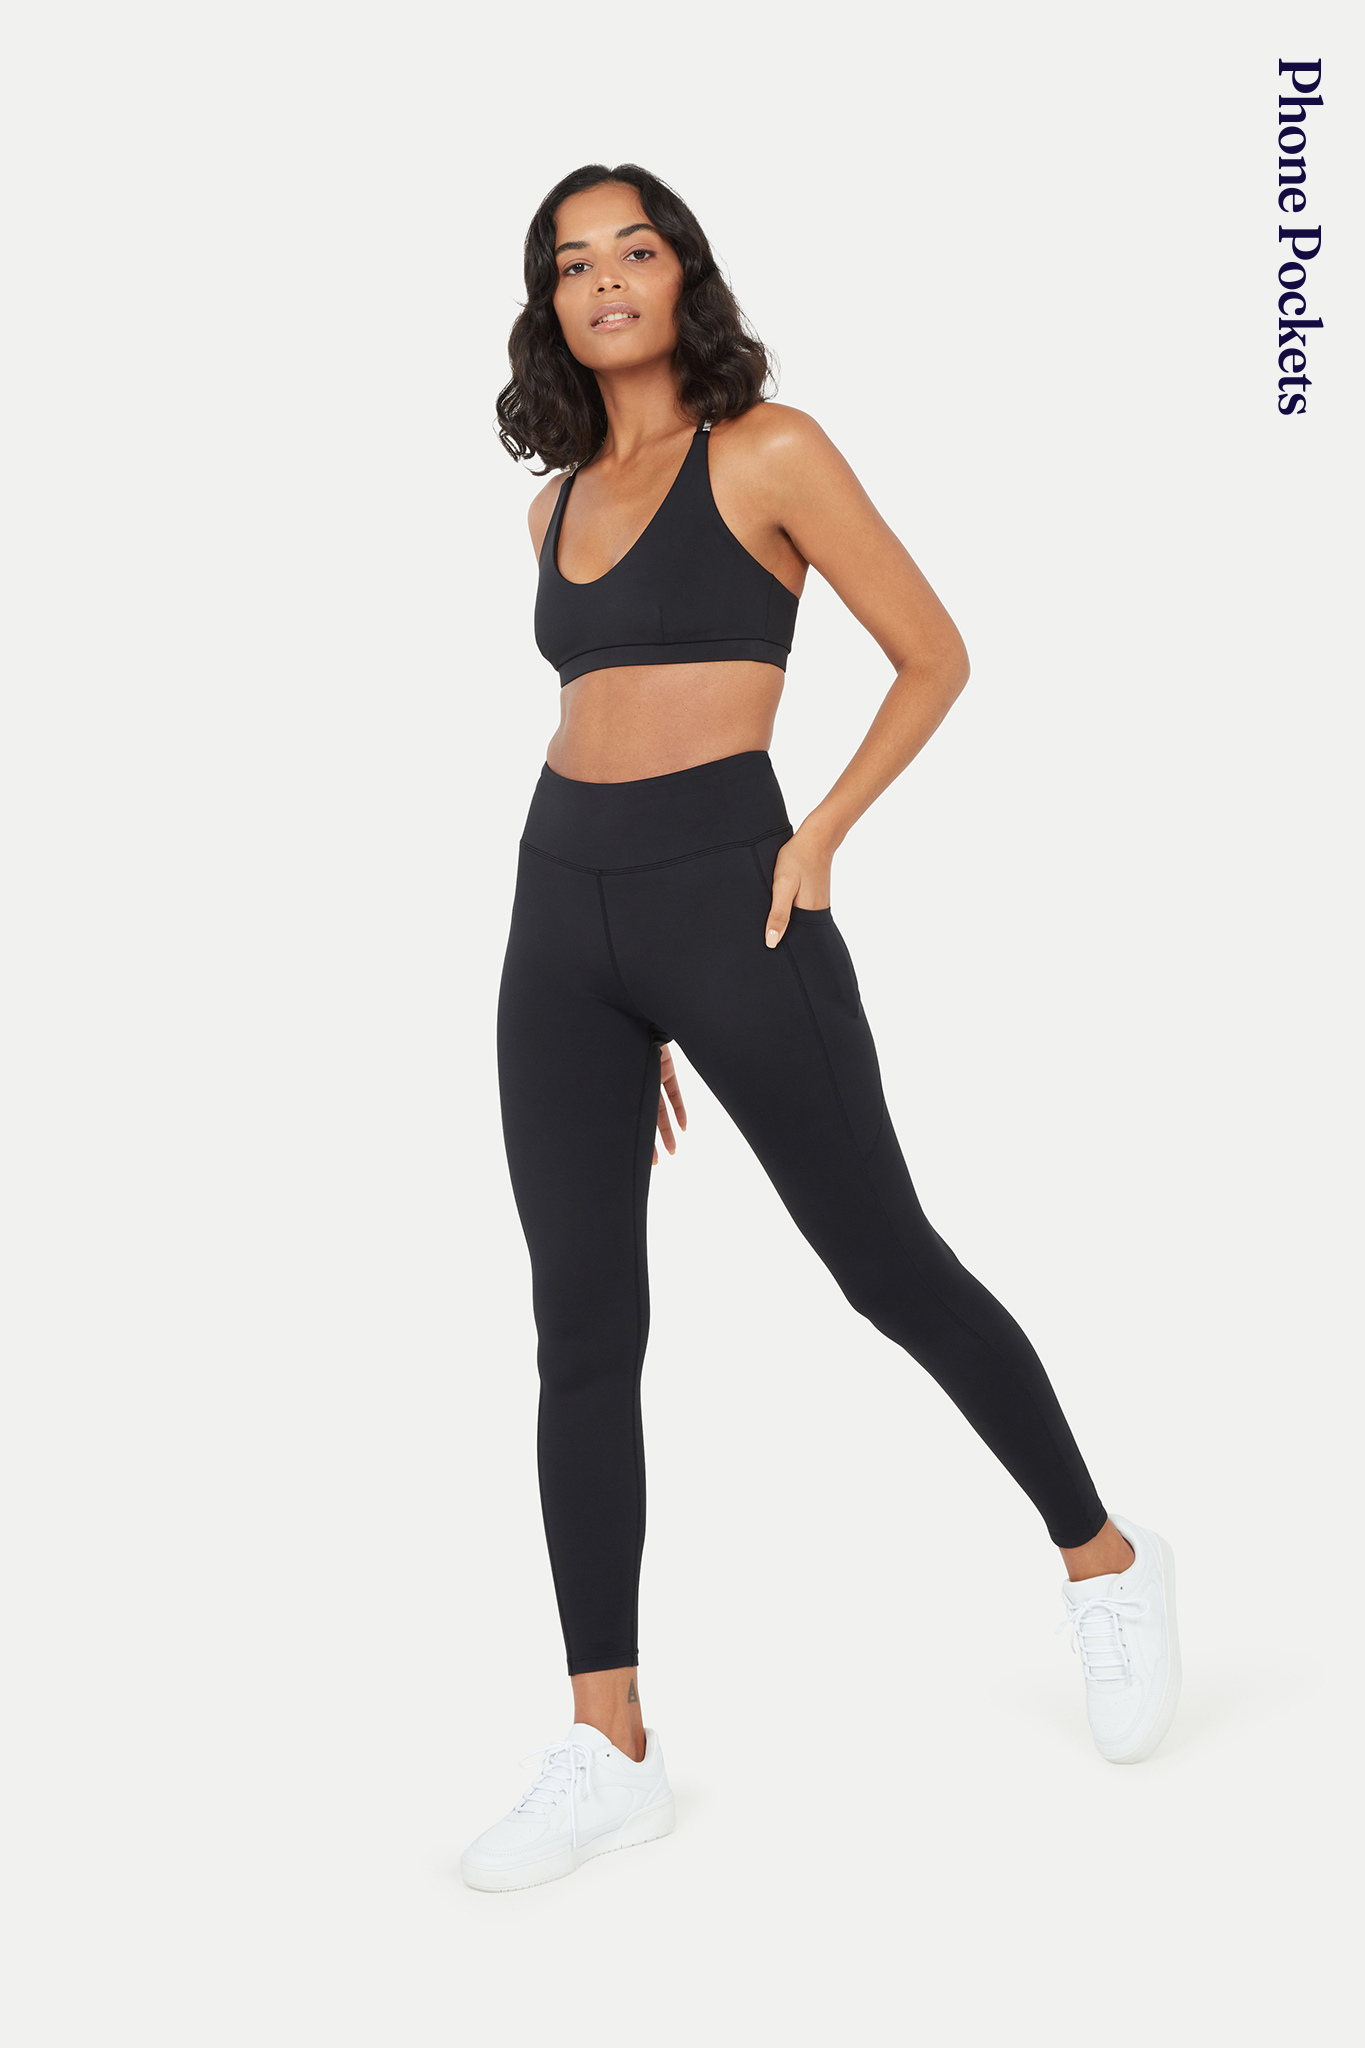 Black Gym Leggings with Pockets, Squat Proof